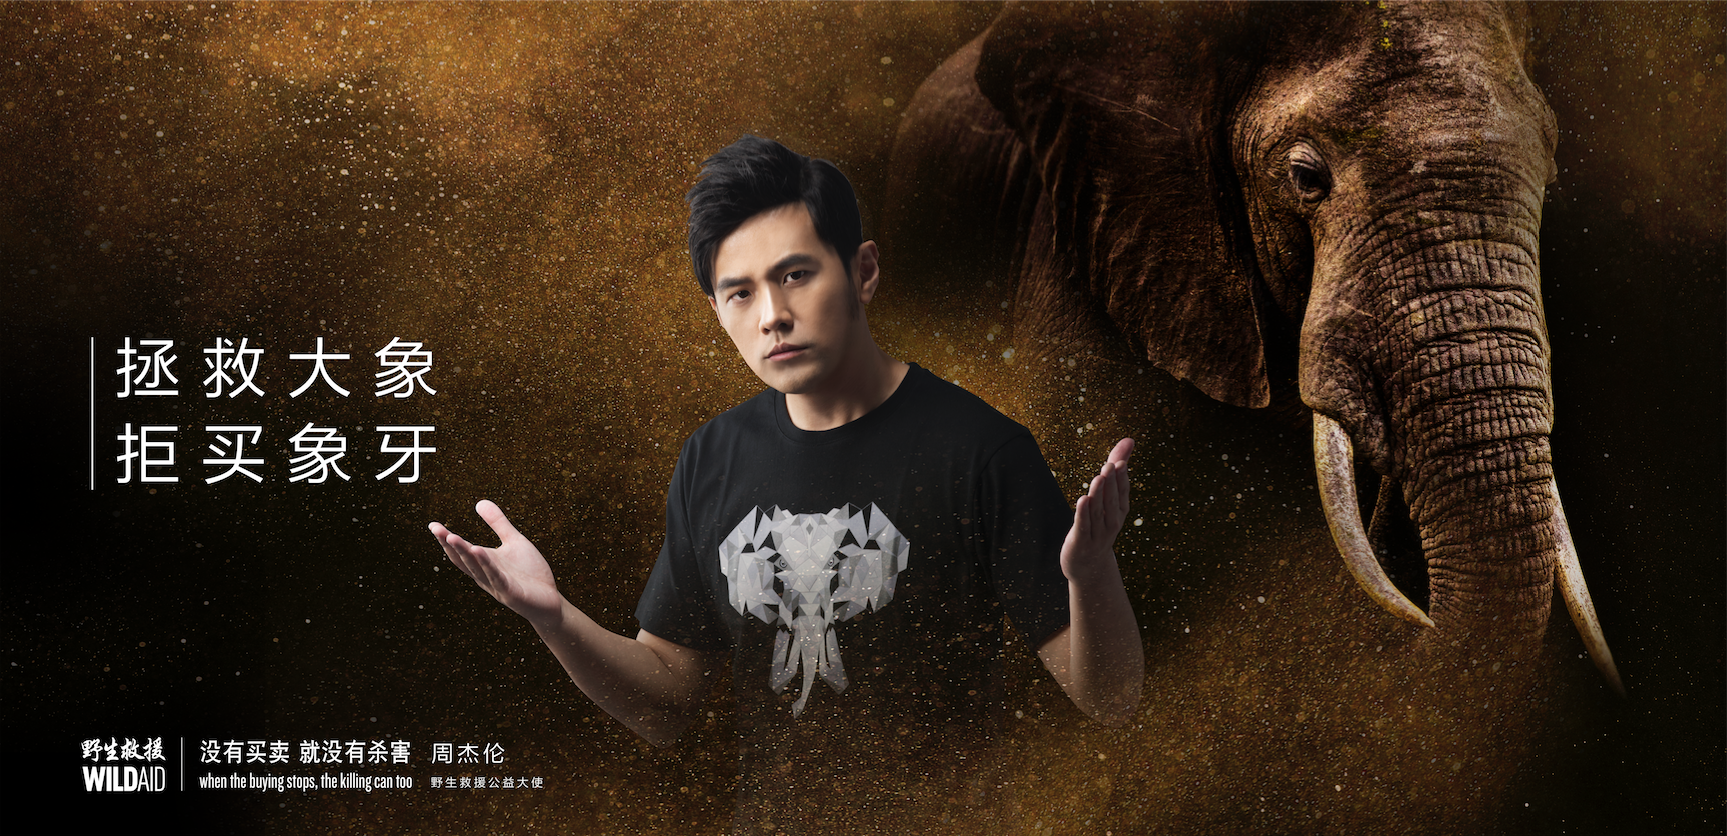 Our ivory campaign with superstar Jay Chou has been widely distributed across Hong Kong.